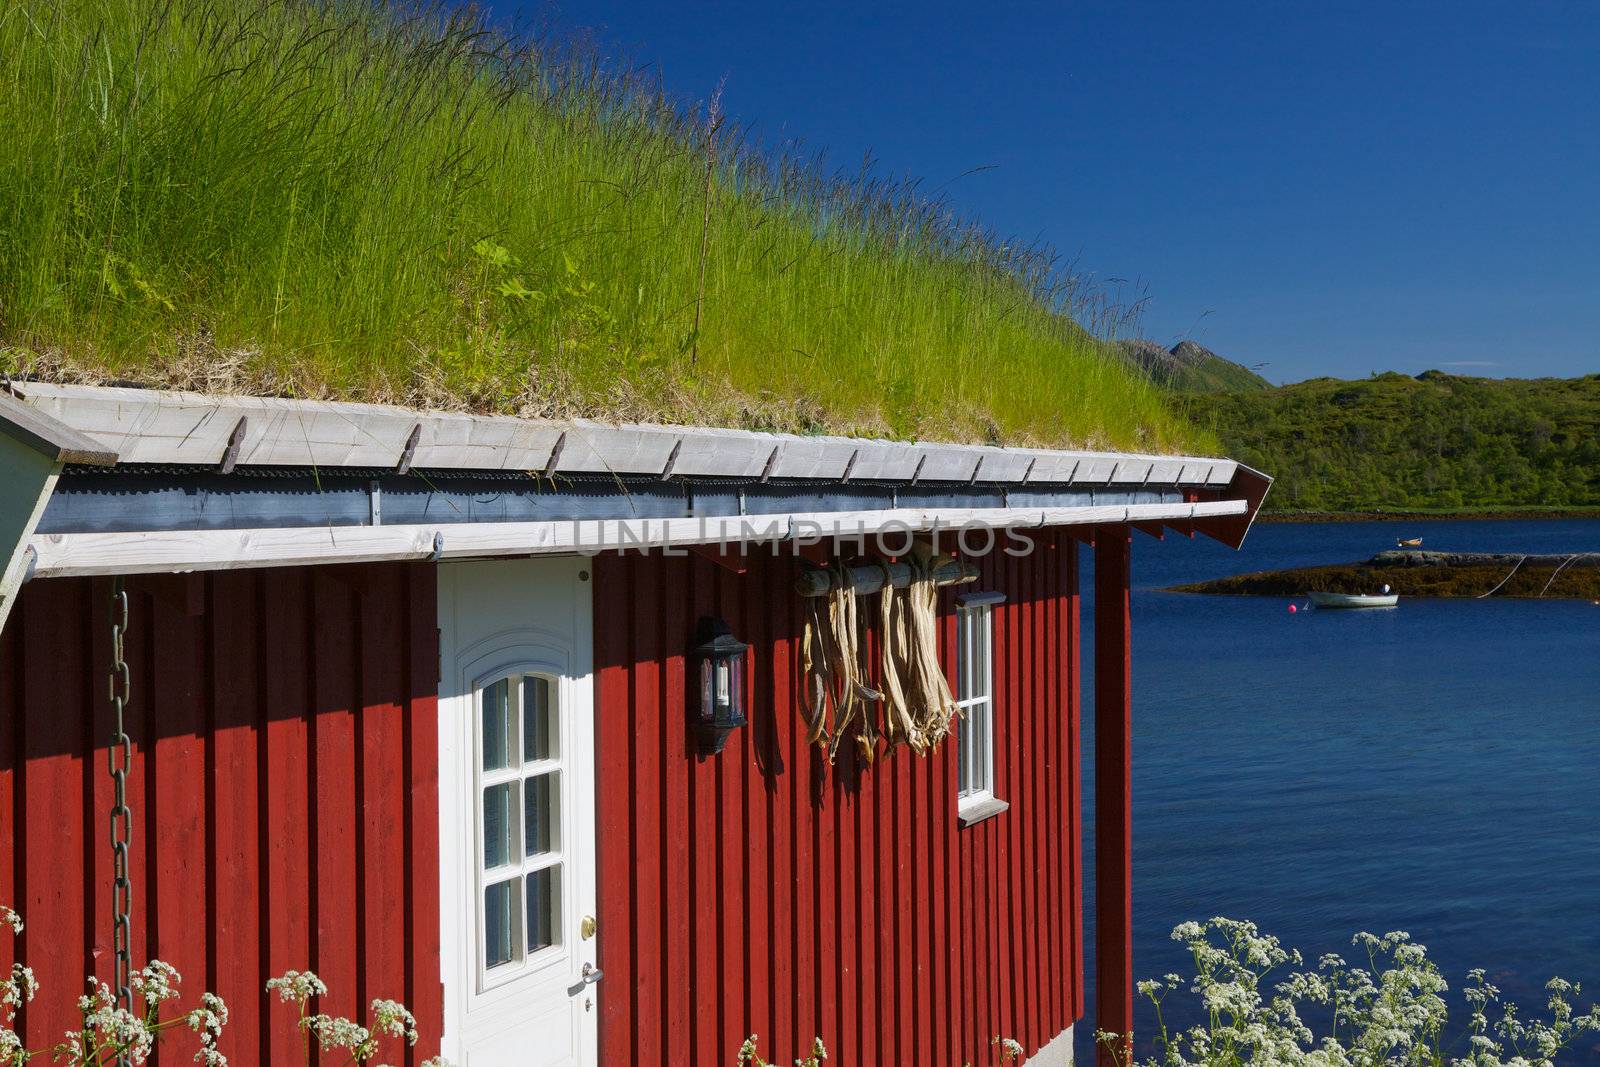 Typical norwegian rorbu hut with sod roof and drying stock fish on Lofoten islands